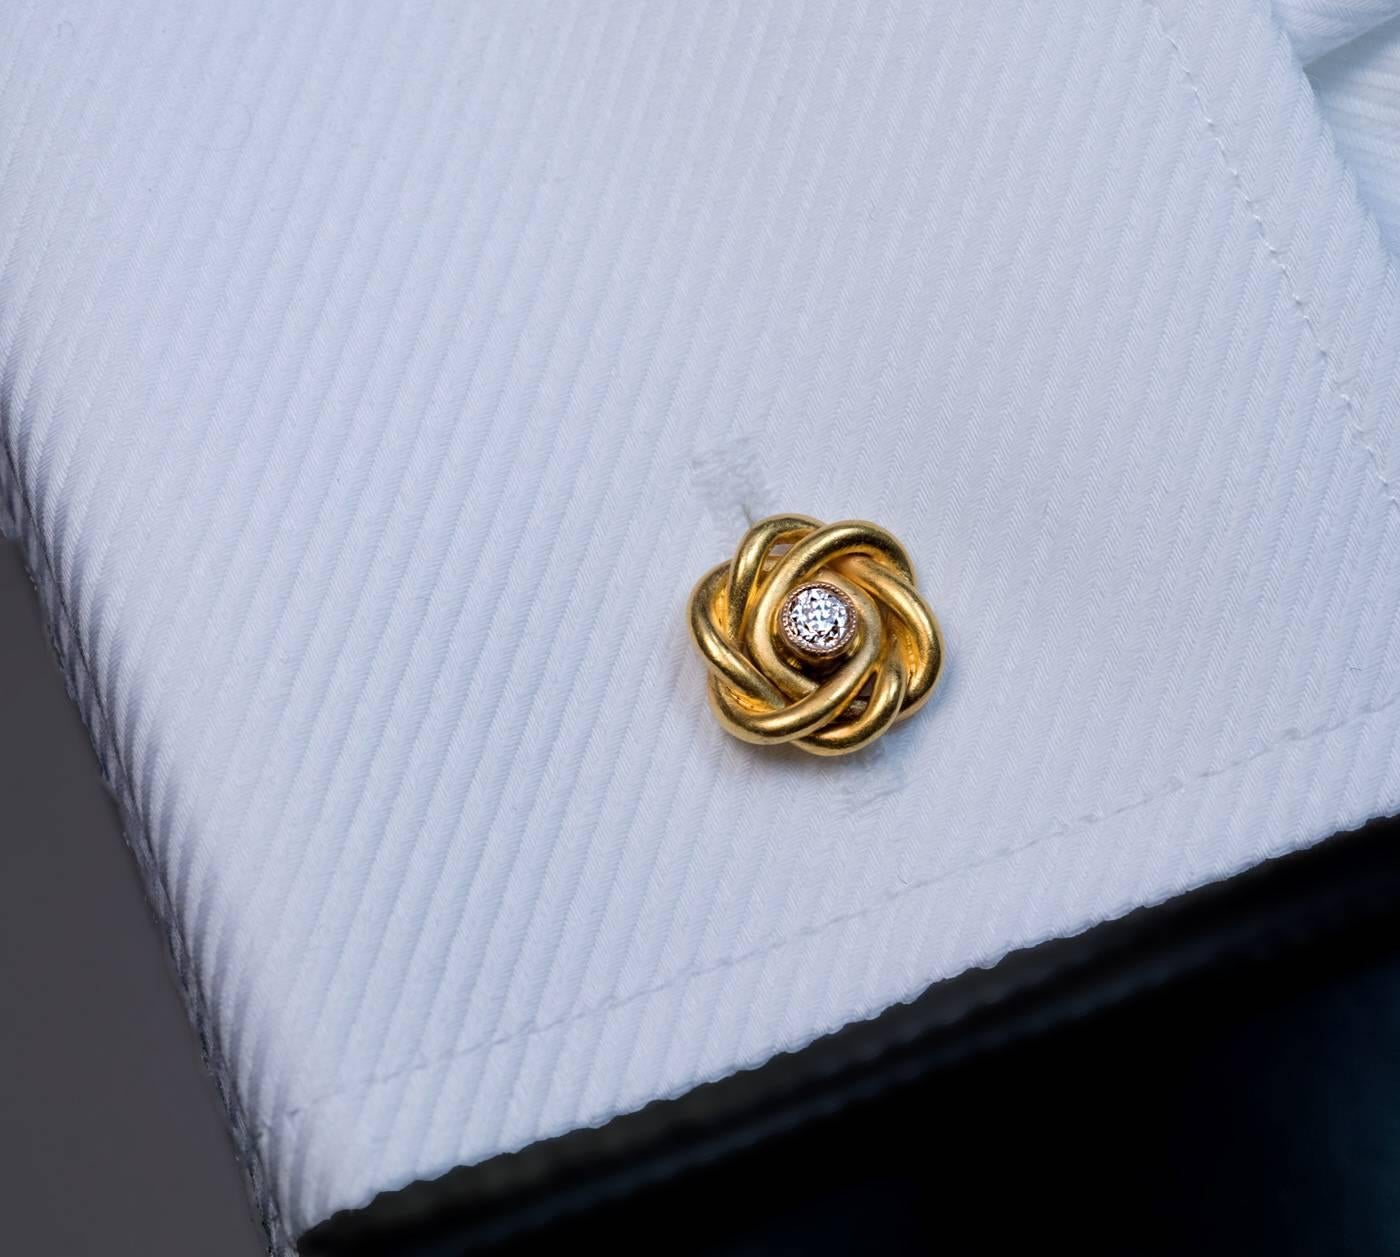 Made in St.Petersburg between 1908 and 1917 by Rudolf Weide, a prominent jeweler of the period.

The 14K gold cufflinks of a knot design are centered with sparkling old European cut diamonds.

Marked with 56 zolotnik Imperial gold standard with St.